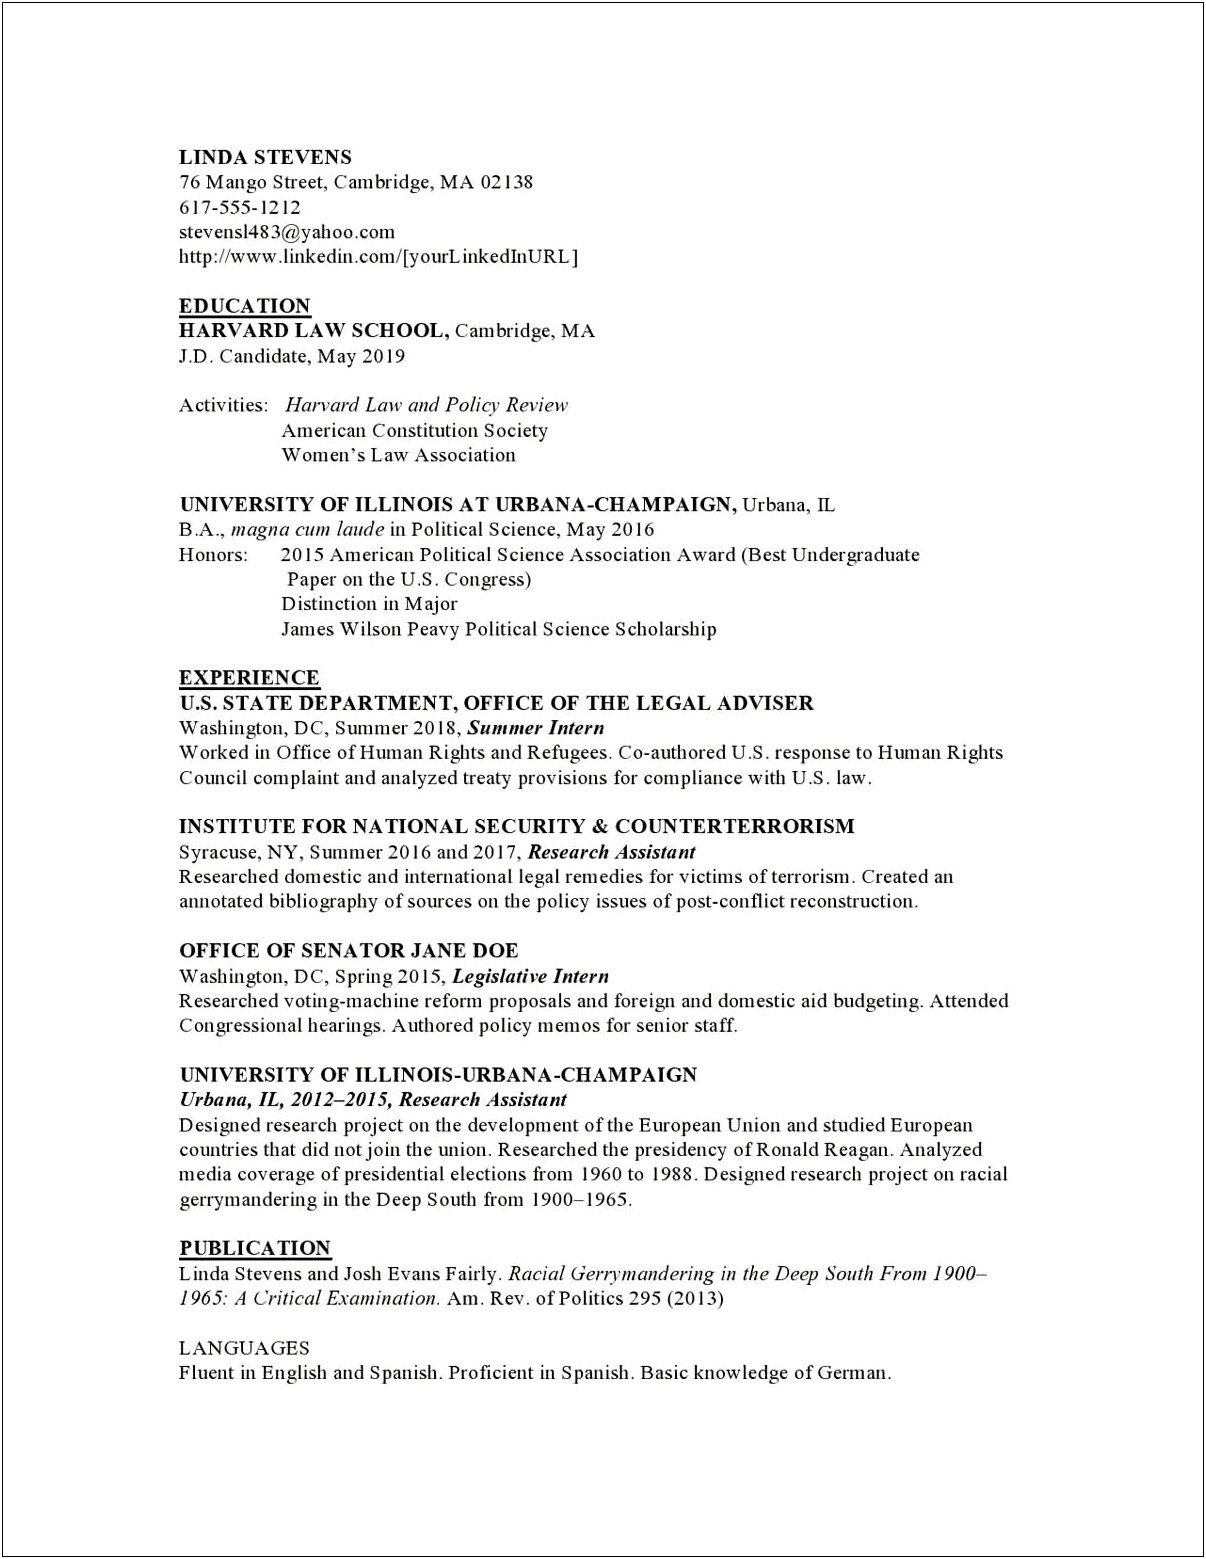 Intern Experience From A Senator's Office Resume